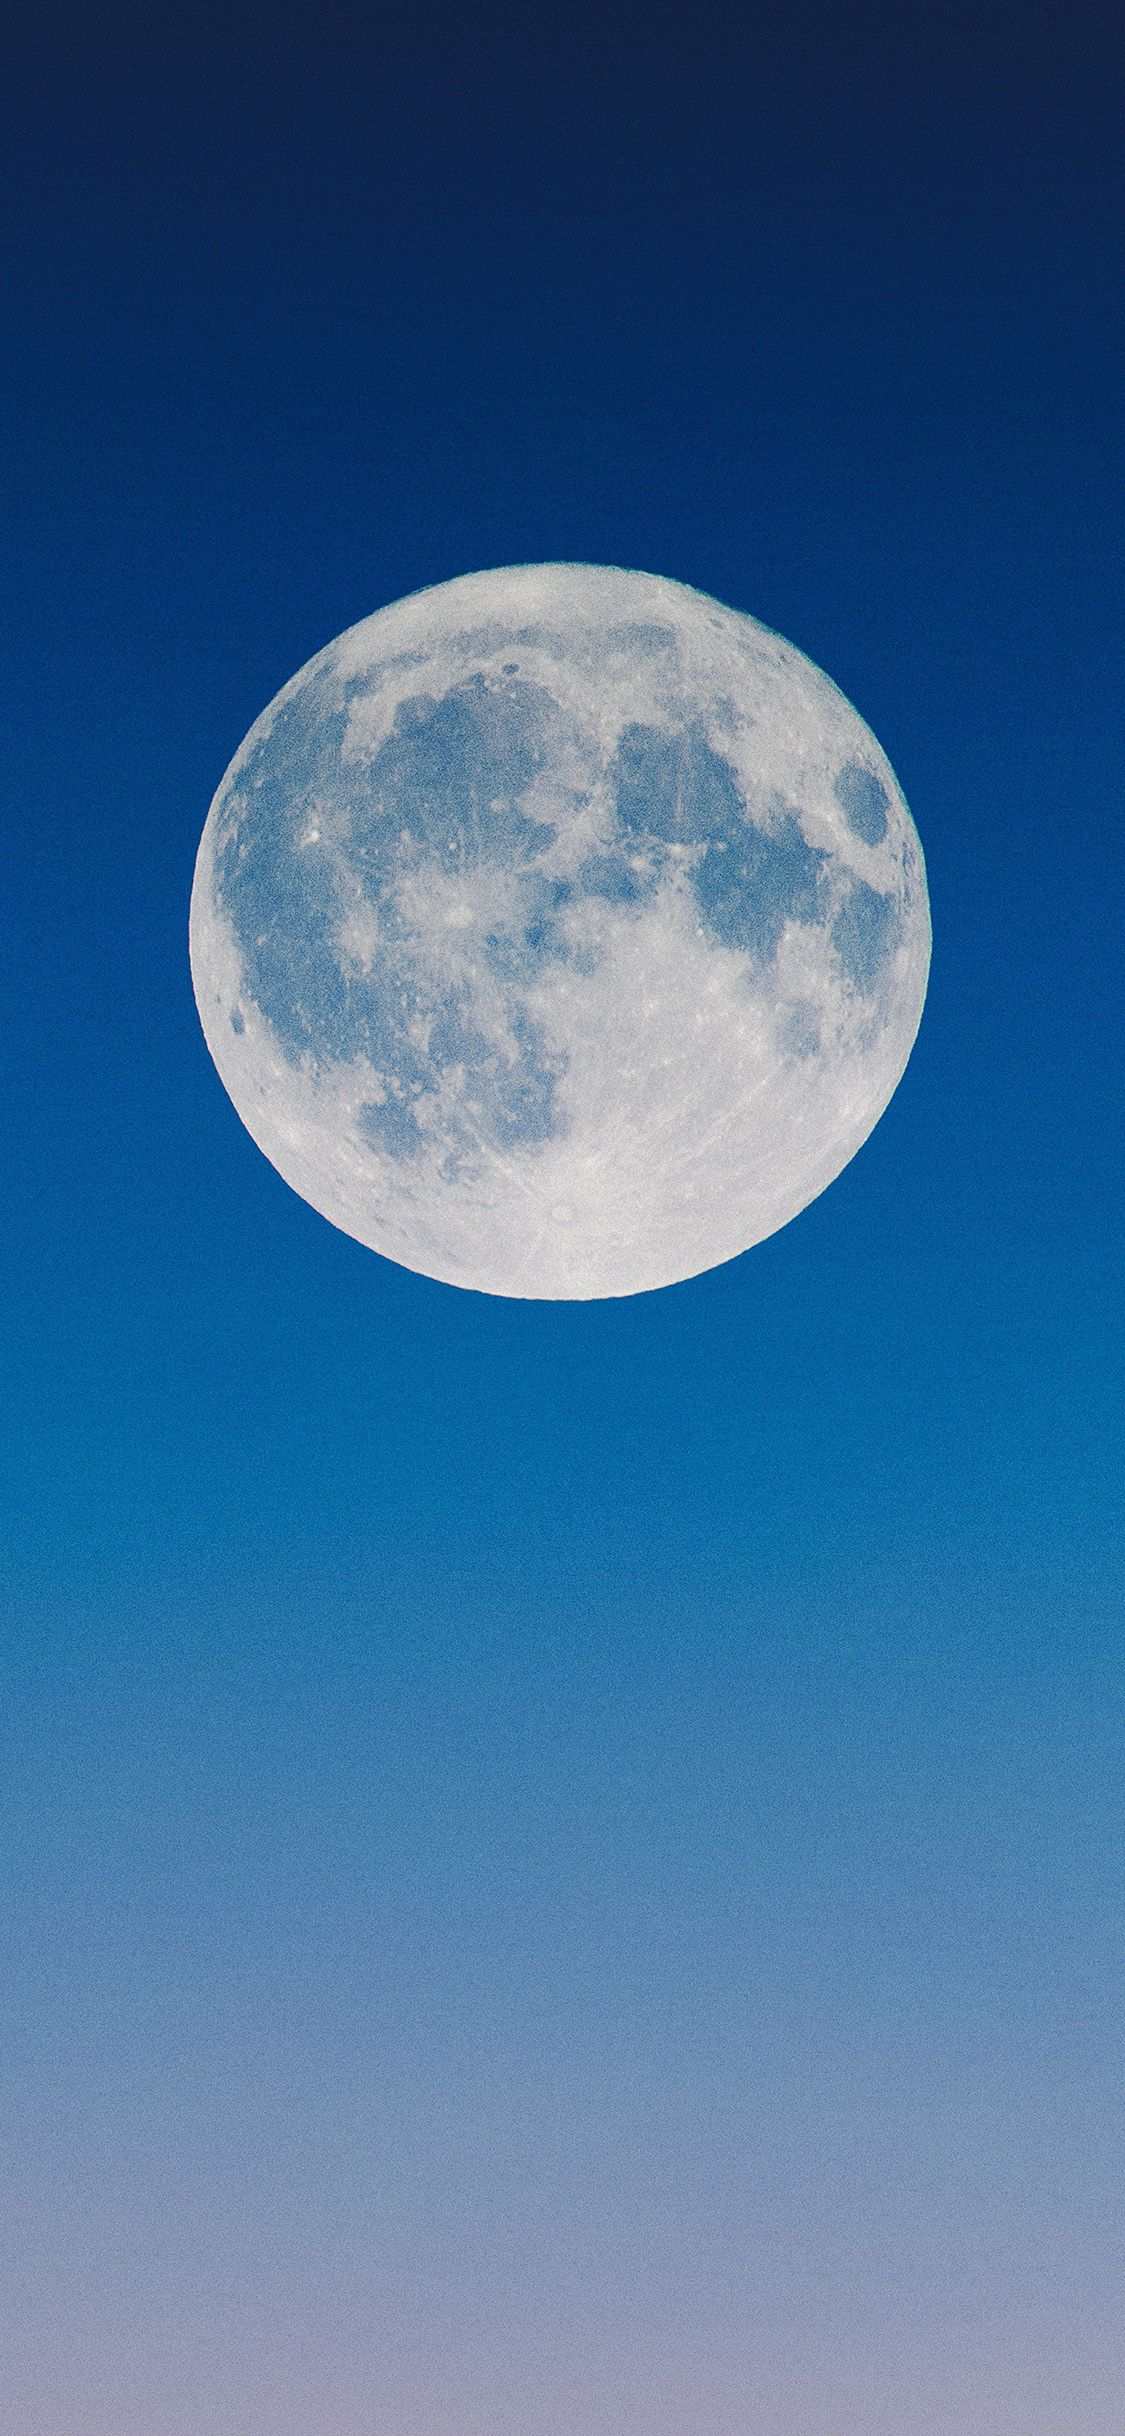 Download these beautifil moon wallpaper